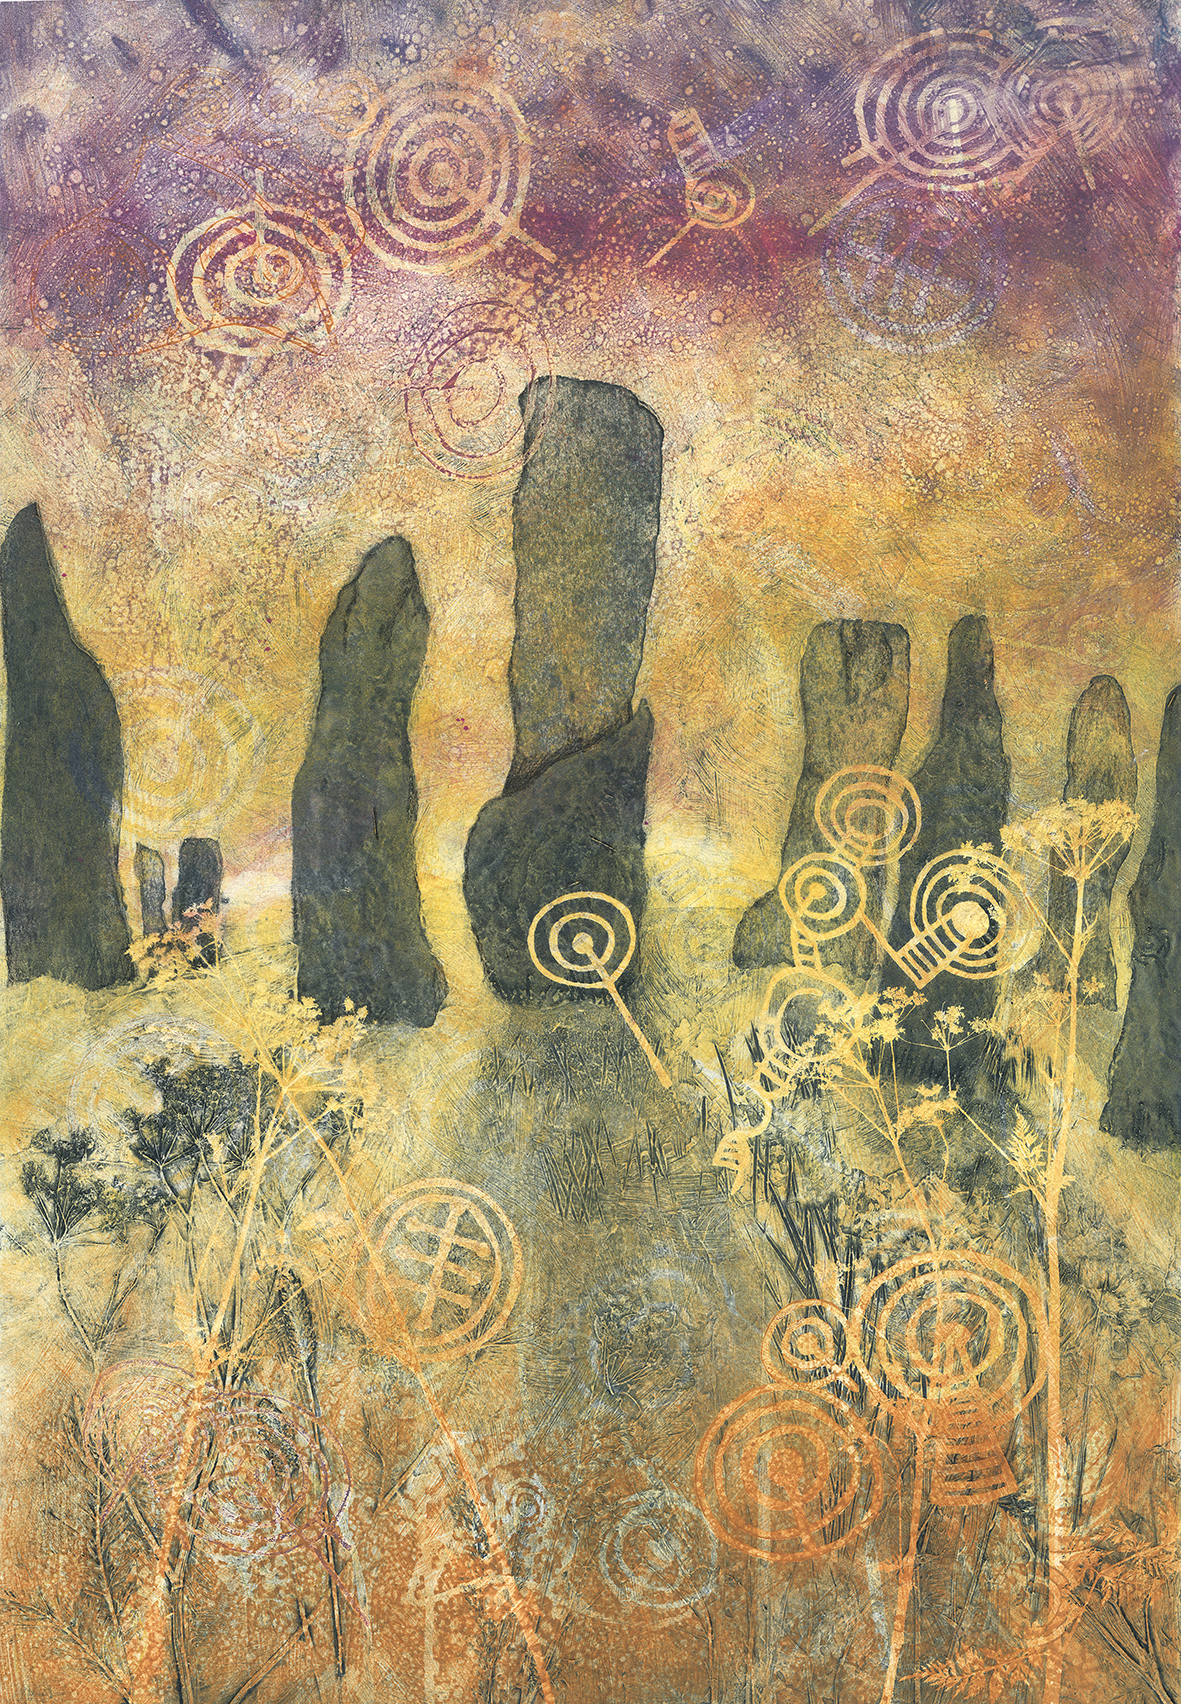 Collagraph print of standing stones in the landscape